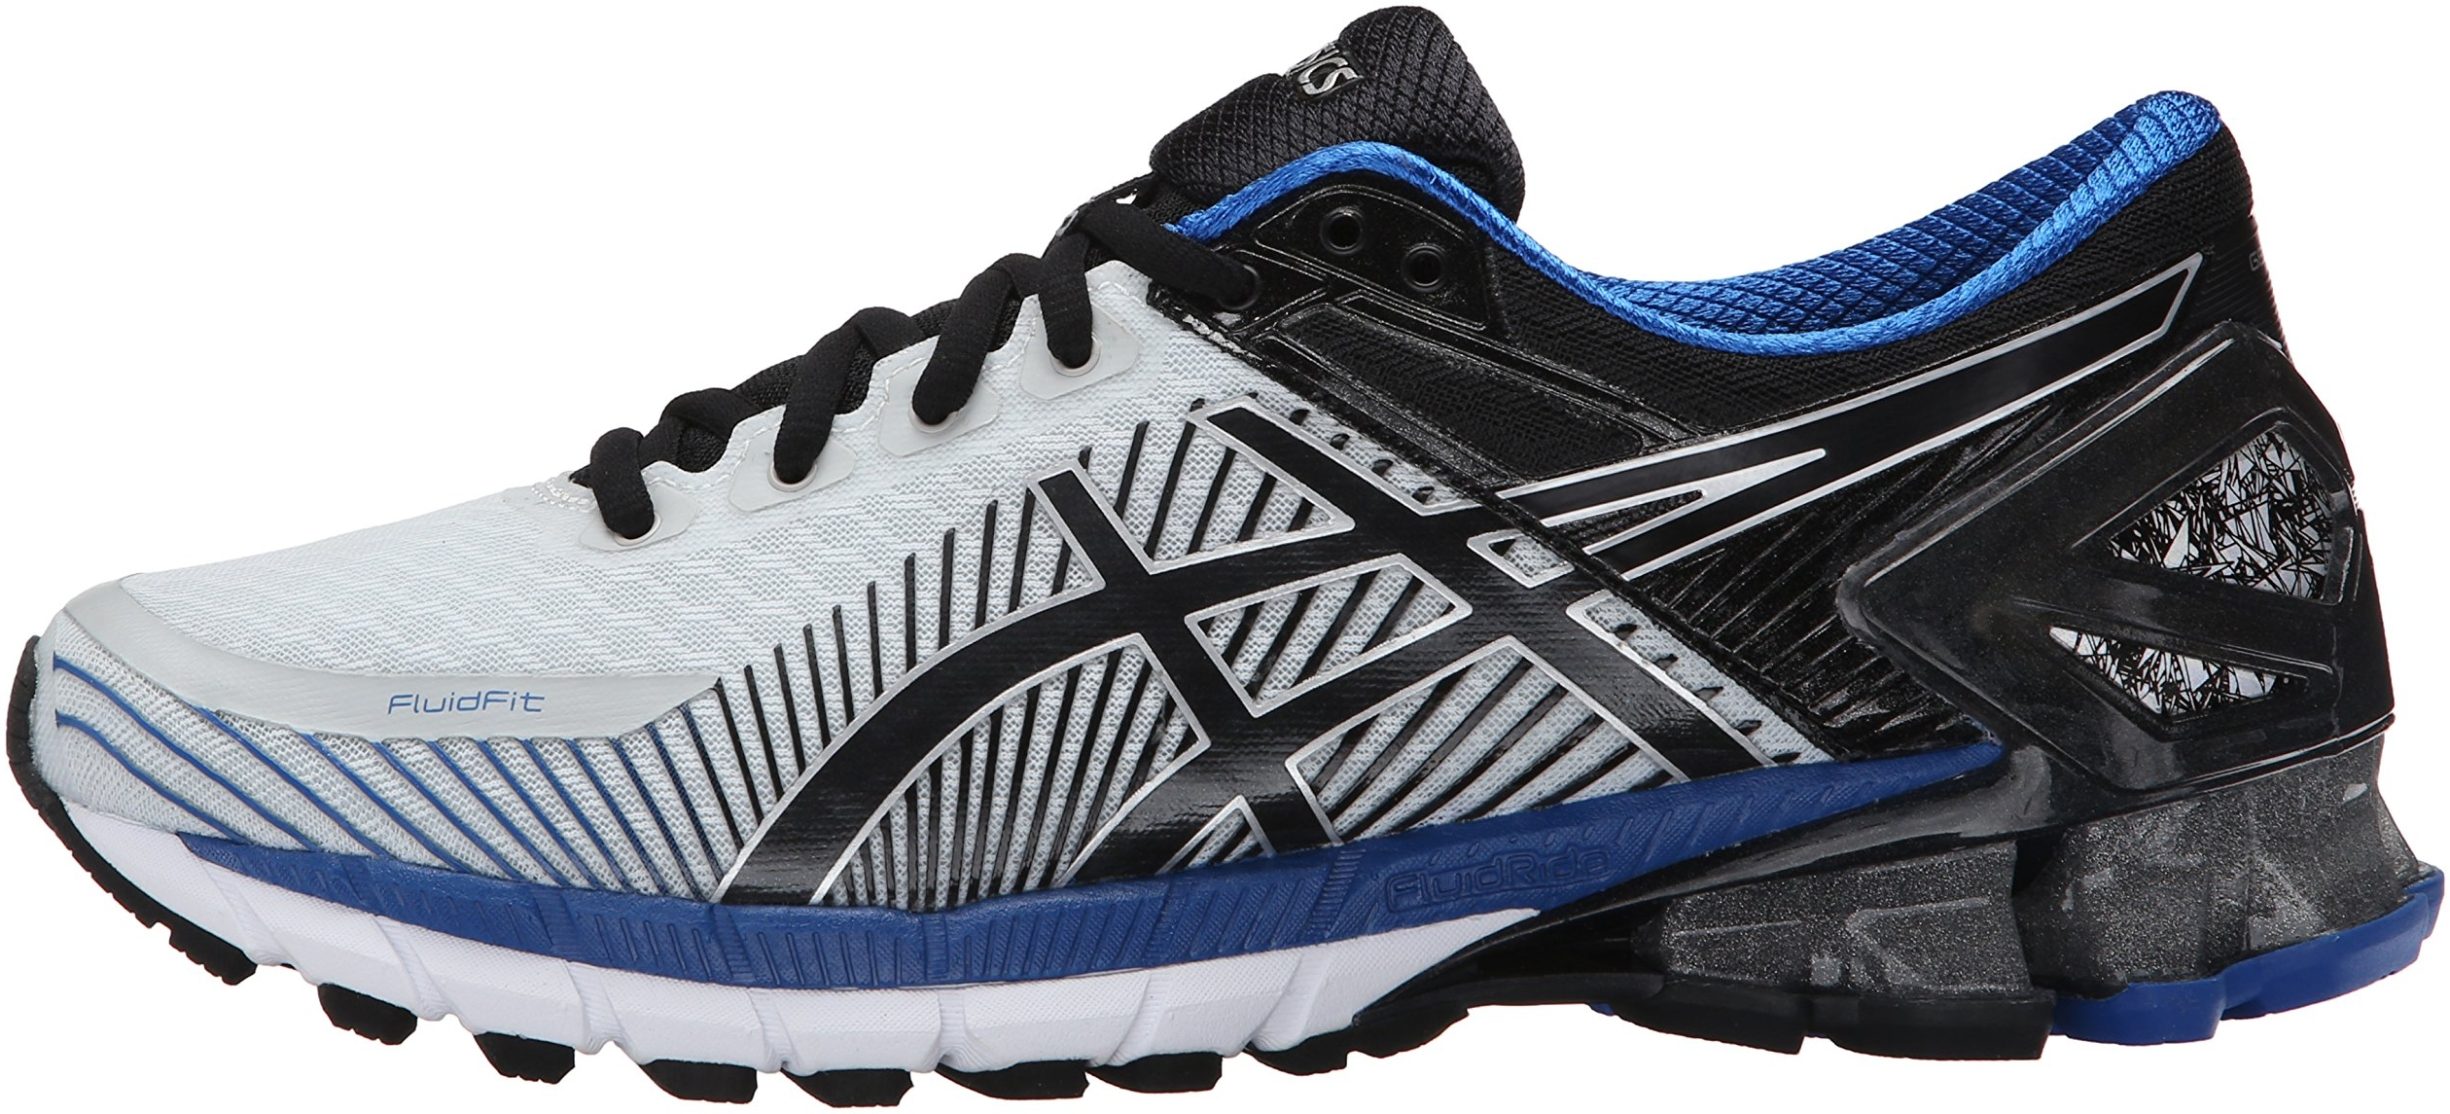 Only $126 + Review of Asics Gel Kinsei 6 | RunRepeat